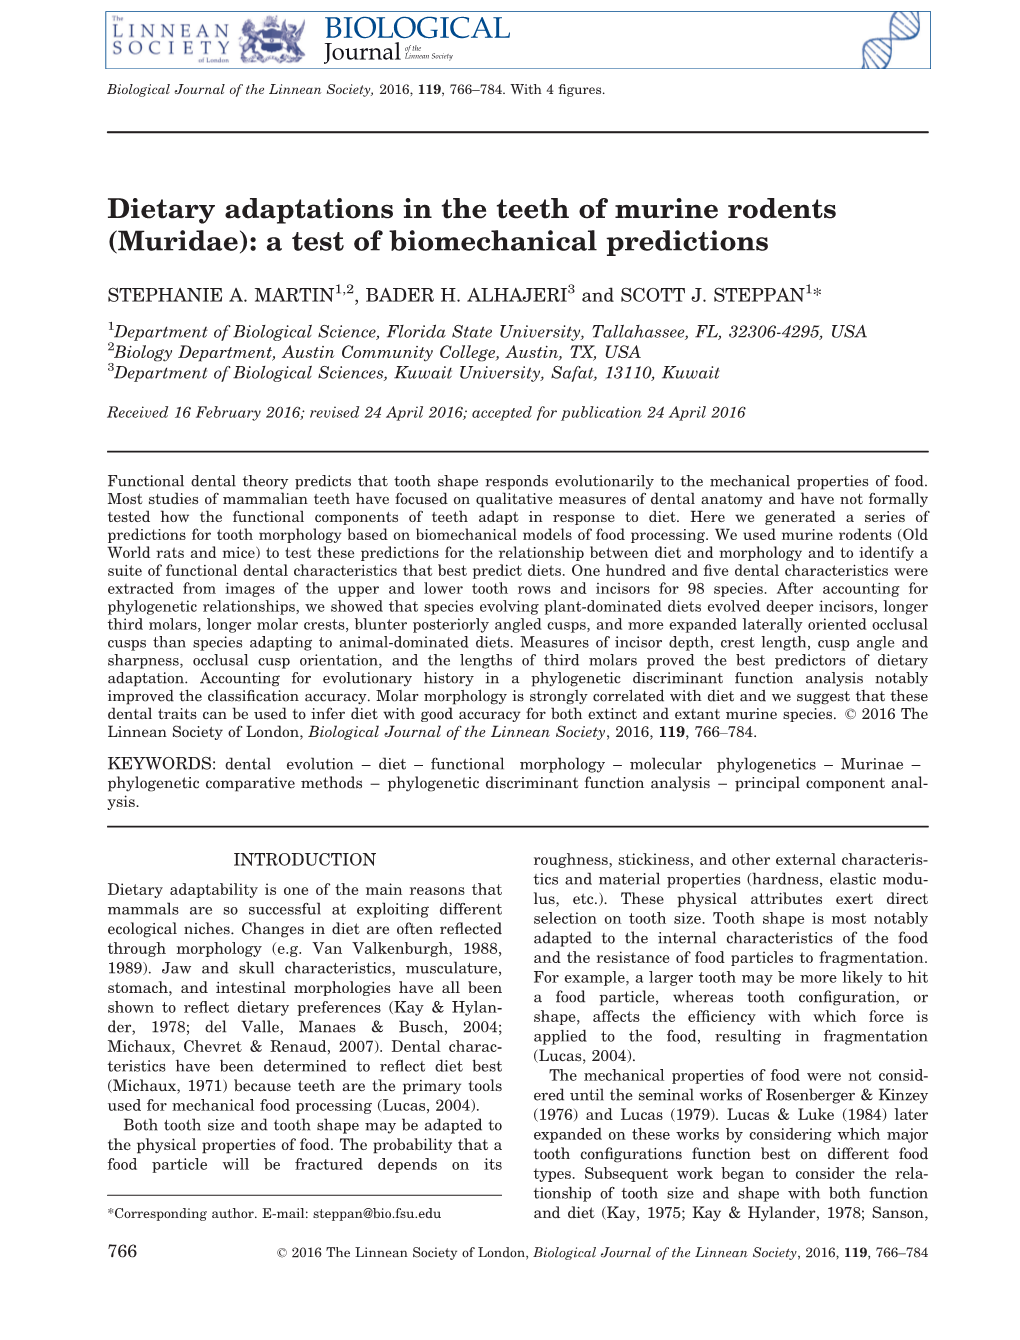 Dietary Adaptations in the Teeth of Murine Rodents (Muridae): a Test of Biomechanical Predictions